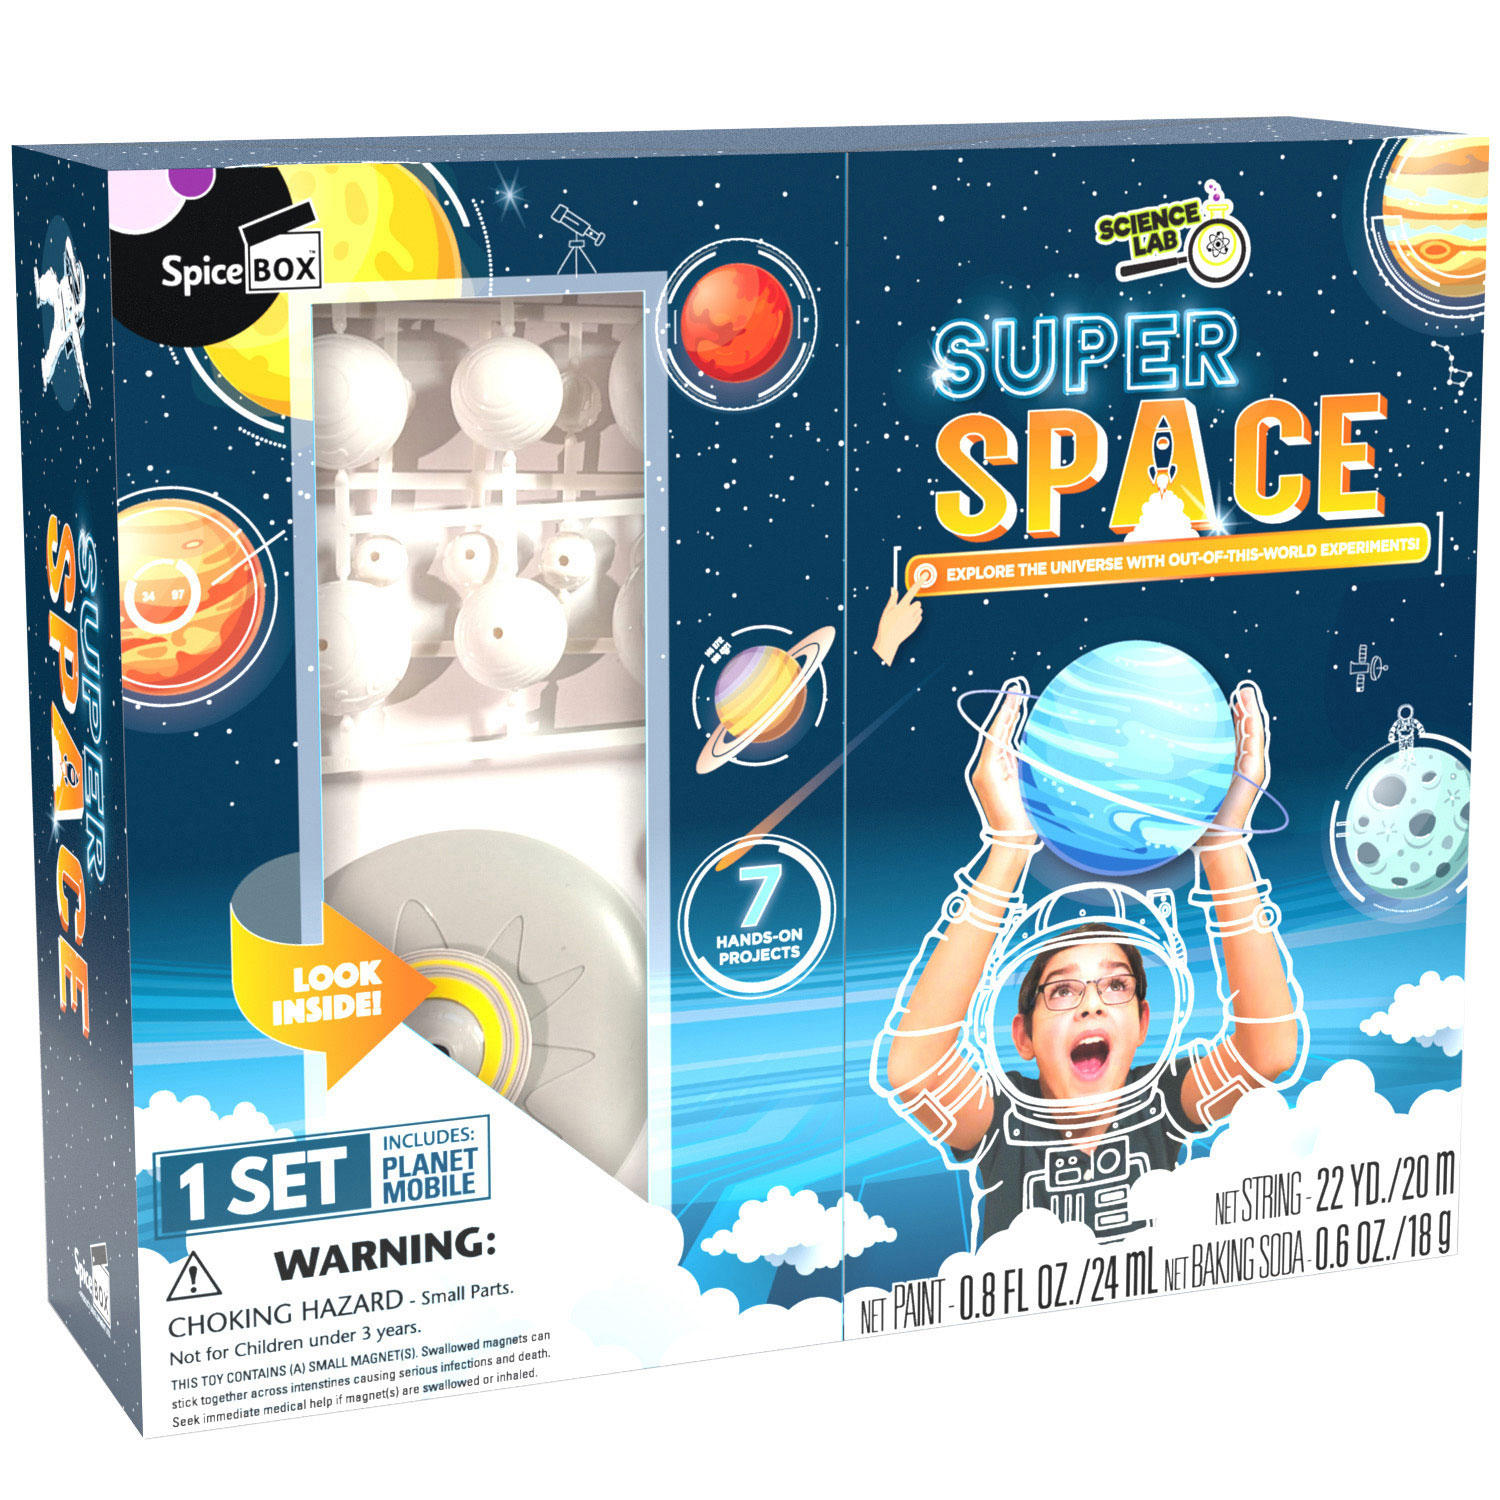 Super Space Science Lab by Spicebox